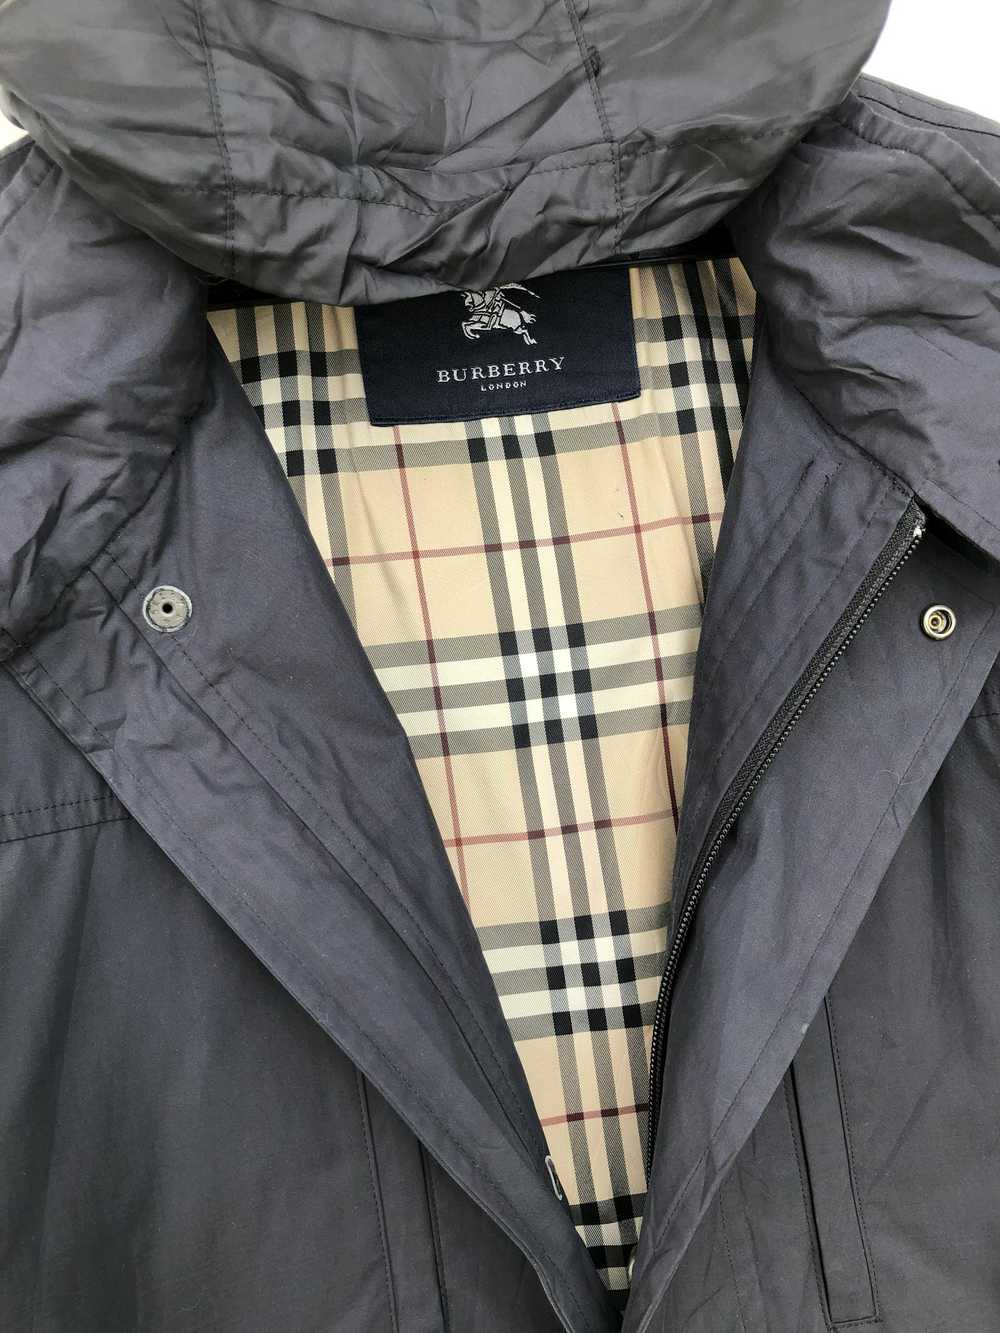 Burberry BURBERRY LIGHT JACKET MADE IN JAPAN - image 6